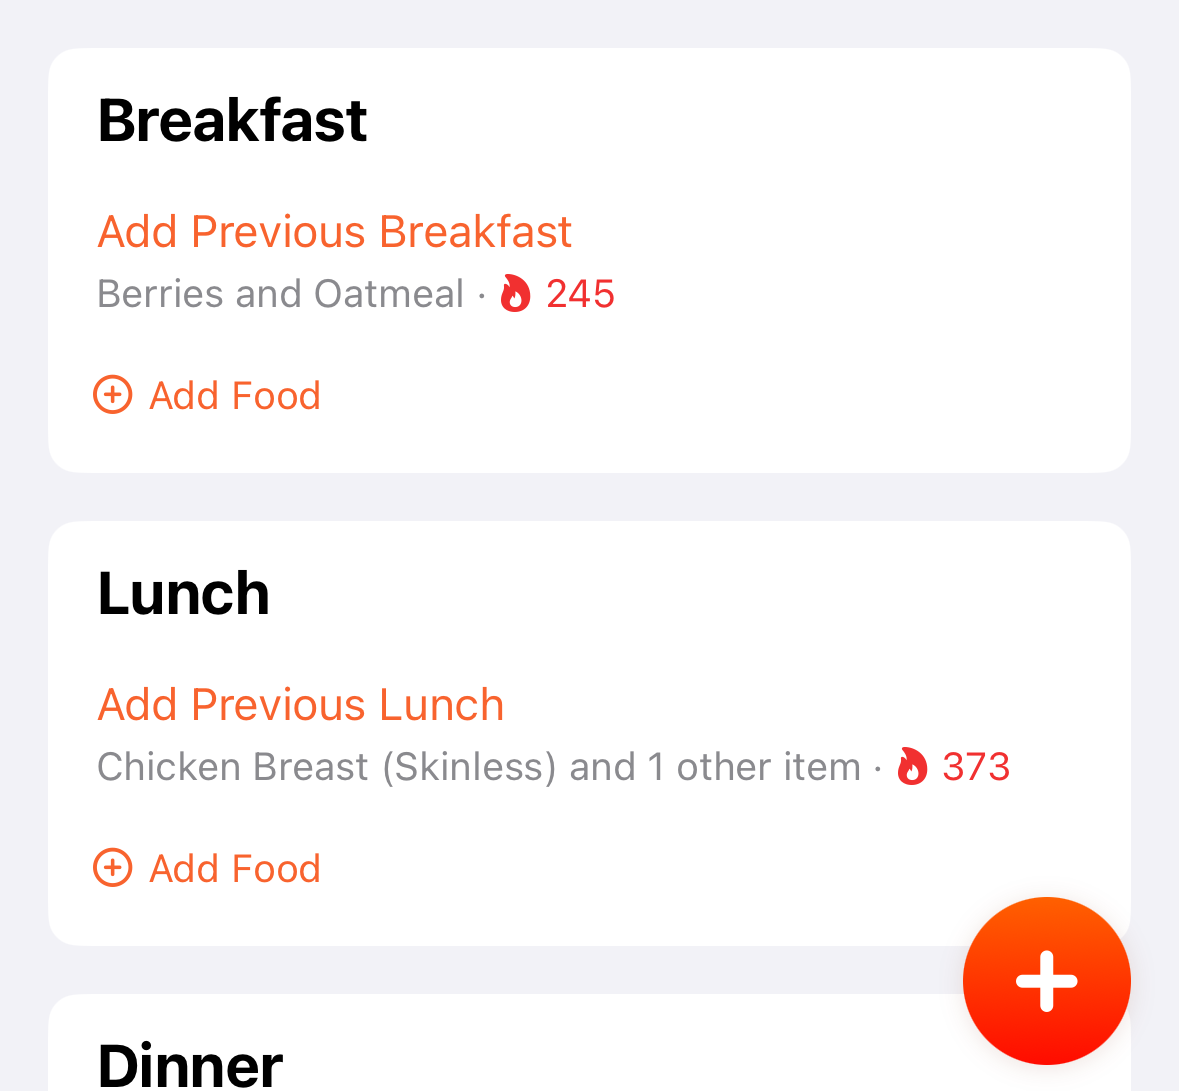 Screenshot of the food log screen with two meal types: breakfast and lunch. In each meal type section there is a button to log what was previously eaten for each respective meal.